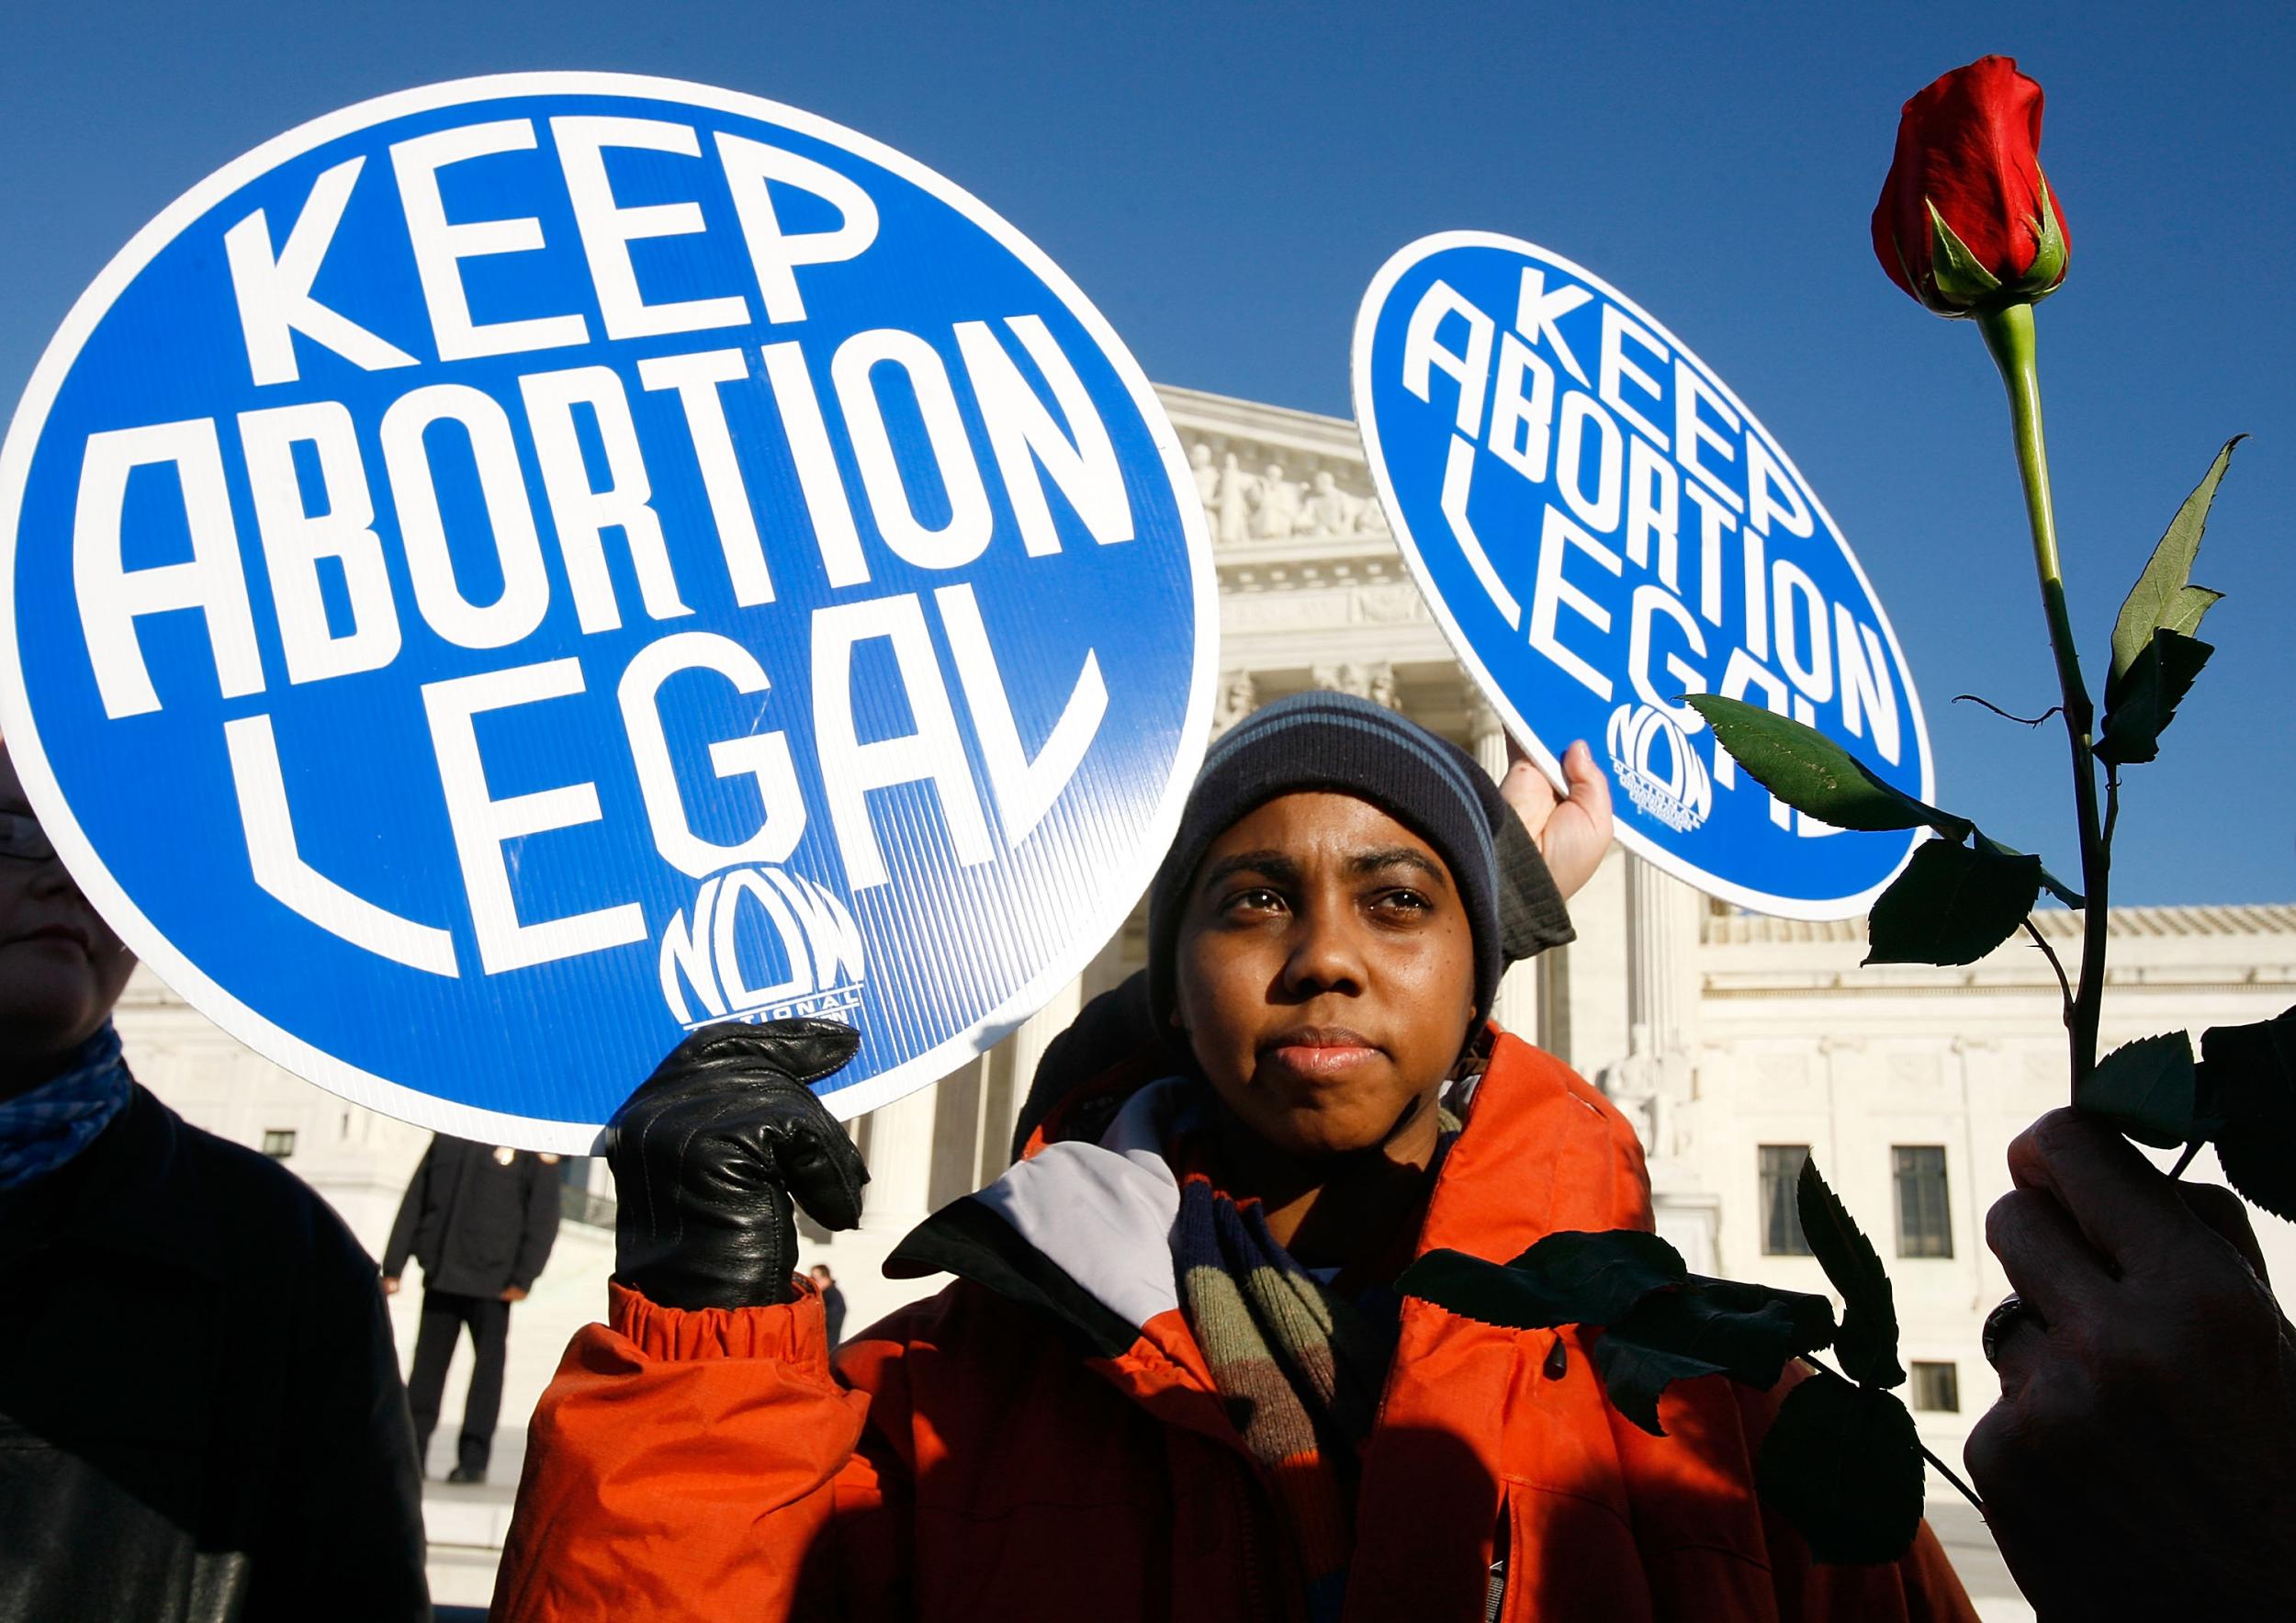 Local pro-choice activist Lisa King holds a sign in front of the U.S. Supreme Court as a pro-life activist holds a rose nearby during the annual 'March for Life' event